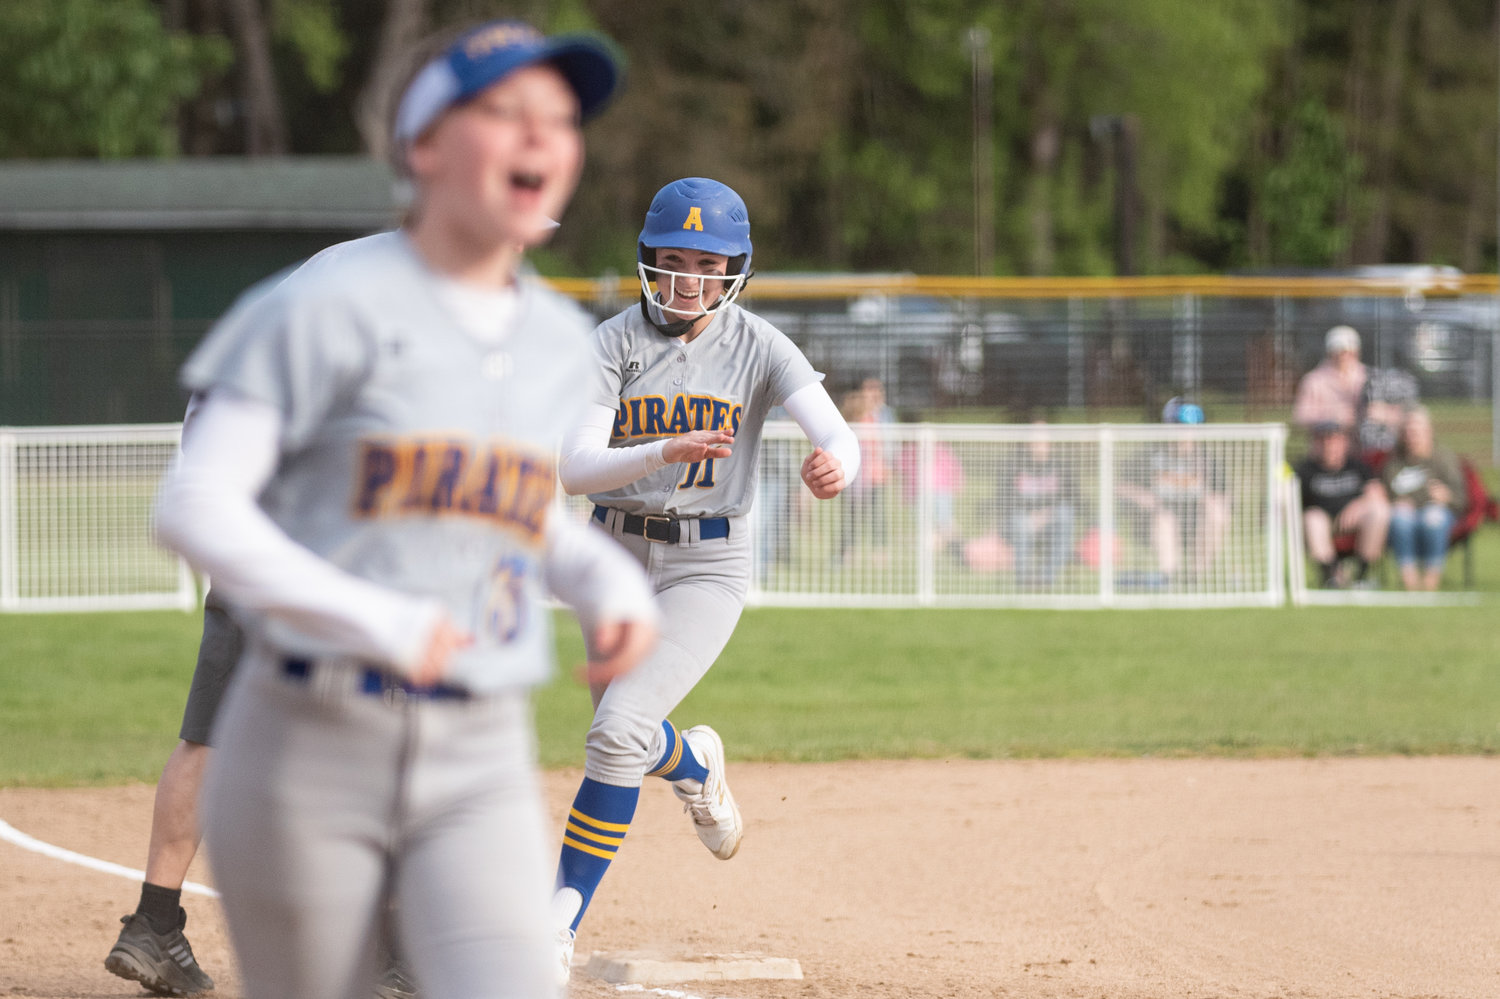 Adna's Danika Hallom runs toward home plate after hitting a home run against PWV in the 2B District 4 softball championship game at Fort Borst Park in Centralia May 21.